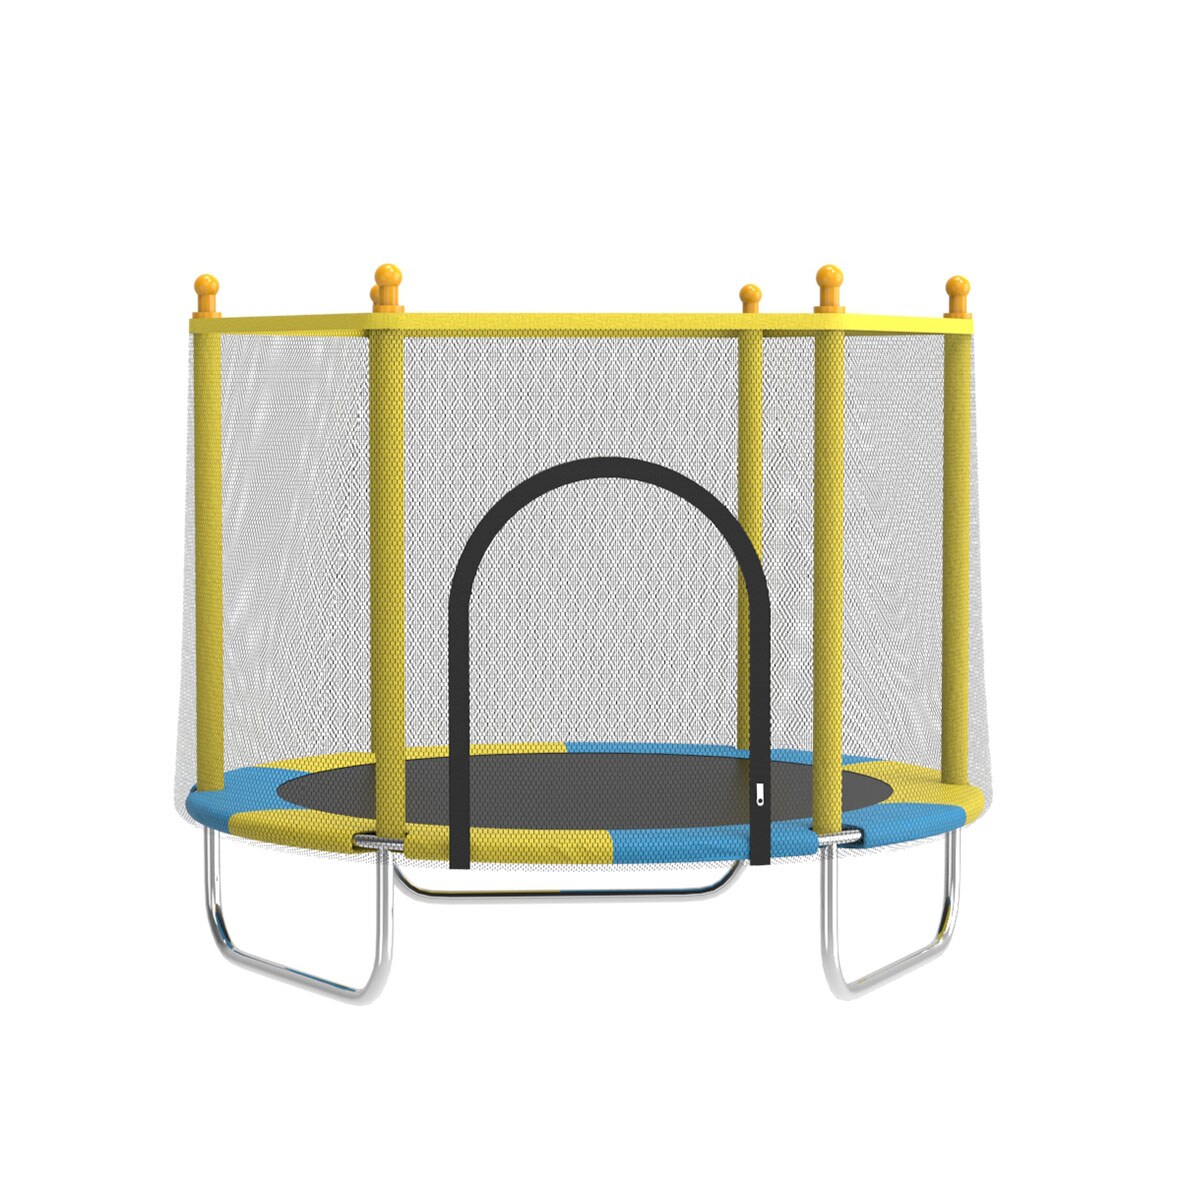 FUFU&GAGA 4.59 Feet kids trampoline with safety enclosure in the ...